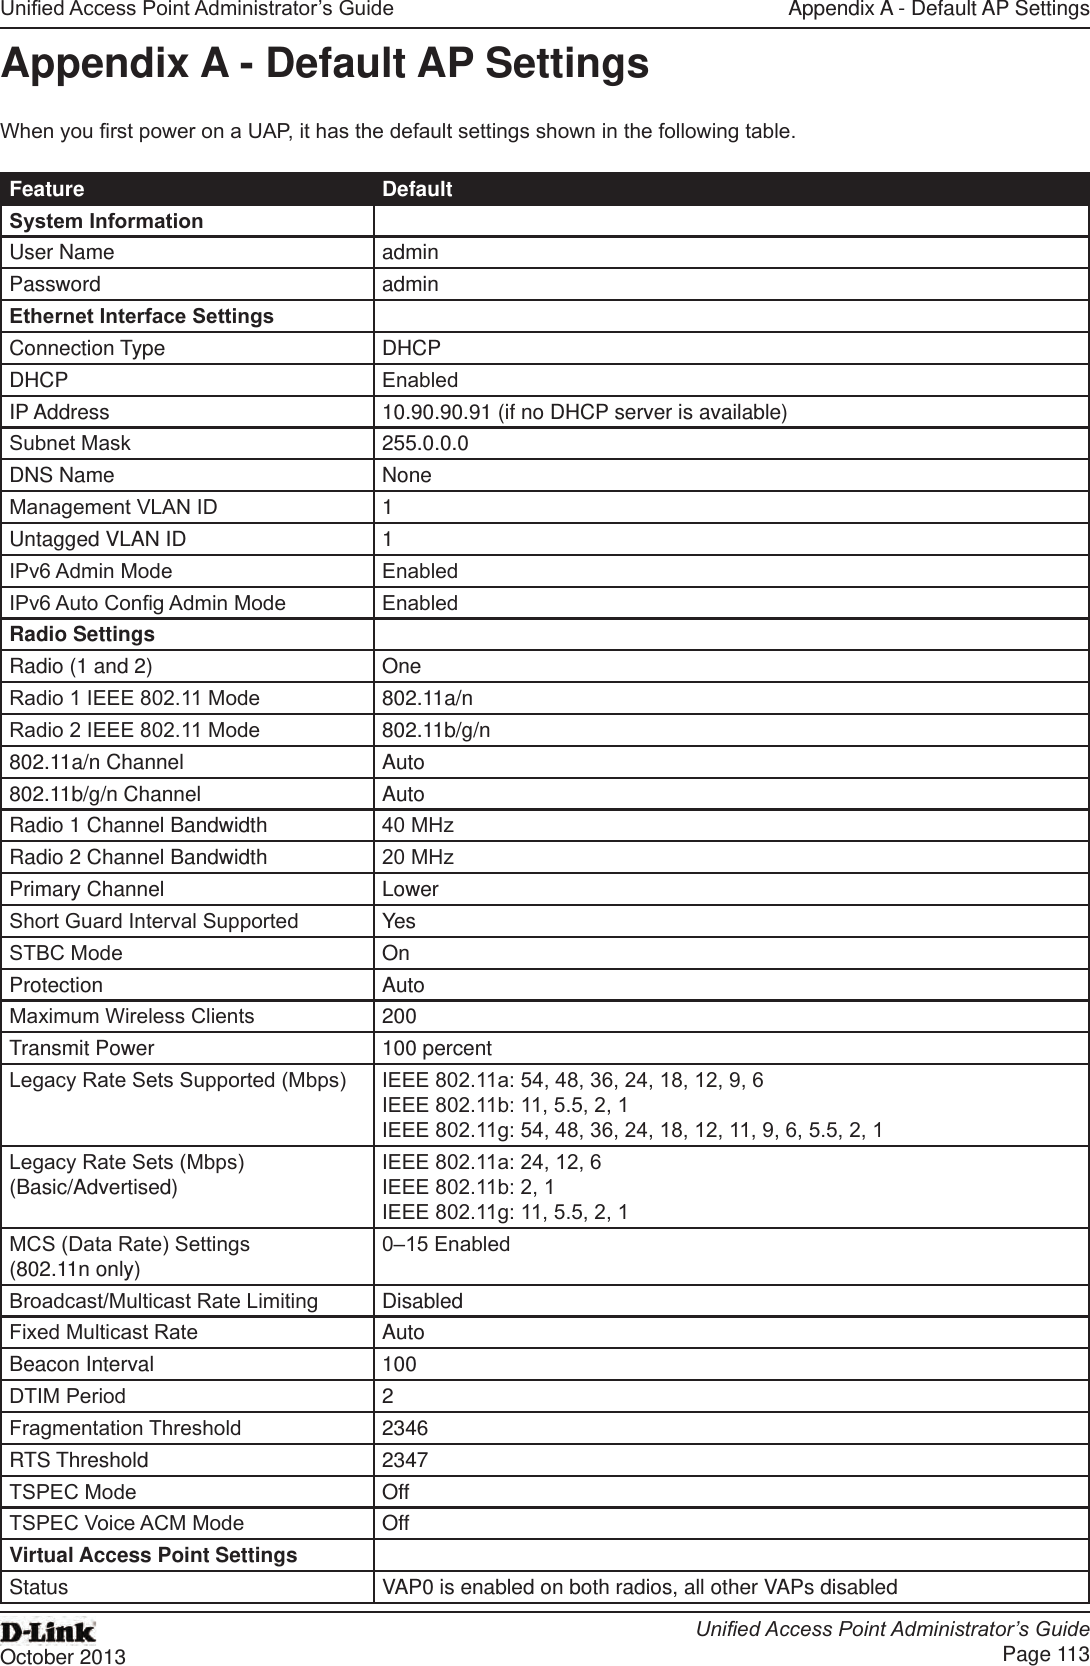 Unied Access Point Administrator’s GuideUnied Access Point Administrator’s GuidePage 113October 2013Appendix A - Default AP SettingsAppendix A - Default AP SettingsWhen you rst power on a UAP, it has the default settings shown in the following table.Feature DefaultSystem InformationUser Name adminPassword adminEthernet Interface SettingsConnection Type DHCPDHCP EnabledIP Address 10.90.90.91 (if no DHCP server is available)Subnet Mask 255.0.0.0DNS Name NoneManagement VLAN ID 1Untagged VLAN ID 1IPv6 Admin Mode EnabledIPv6 Auto Cong Admin Mode EnabledRadio SettingsRadio (1 and 2) OneRadio 1 IEEE 802.11 Mode 802.11a/nRadio 2 IEEE 802.11 Mode 802.11b/g/n802.11a/n Channel Auto802.11b/g/n Channel AutoRadio 1 Channel Bandwidth 40 MHzRadio 2 Channel Bandwidth 20 MHzPrimary Channel LowerShort Guard Interval Supported YesSTBC Mode OnProtection AutoMaximum Wireless Clients 200Transmit Power 100 percentLegacy Rate Sets Supported (Mbps) IEEE 802.11a: 54, 48, 36, 24, 18, 12, 9, 6 IEEE 802.11b: 11, 5.5, 2, 1IEEE 802.11g: 54, 48, 36, 24, 18, 12, 11, 9, 6, 5.5, 2, 1Legacy Rate Sets (Mbps)(Basic/Advertised)IEEE 802.11a: 24, 12, 6IEEE 802.11b: 2, 1IEEE 802.11g: 11, 5.5, 2, 1MCS (Data Rate) Settings (802.11n only)0–15 EnabledBroadcast/Multicast Rate Limiting DisabledFixed Multicast Rate AutoBeacon Interval 100DTIM Period 2Fragmentation Threshold 2346RTS Threshold 2347TSPEC Mode OffTSPEC Voice ACM Mode OffVirtual Access Point SettingsStatus VAP0 is enabled on both radios, all other VAPs disabled